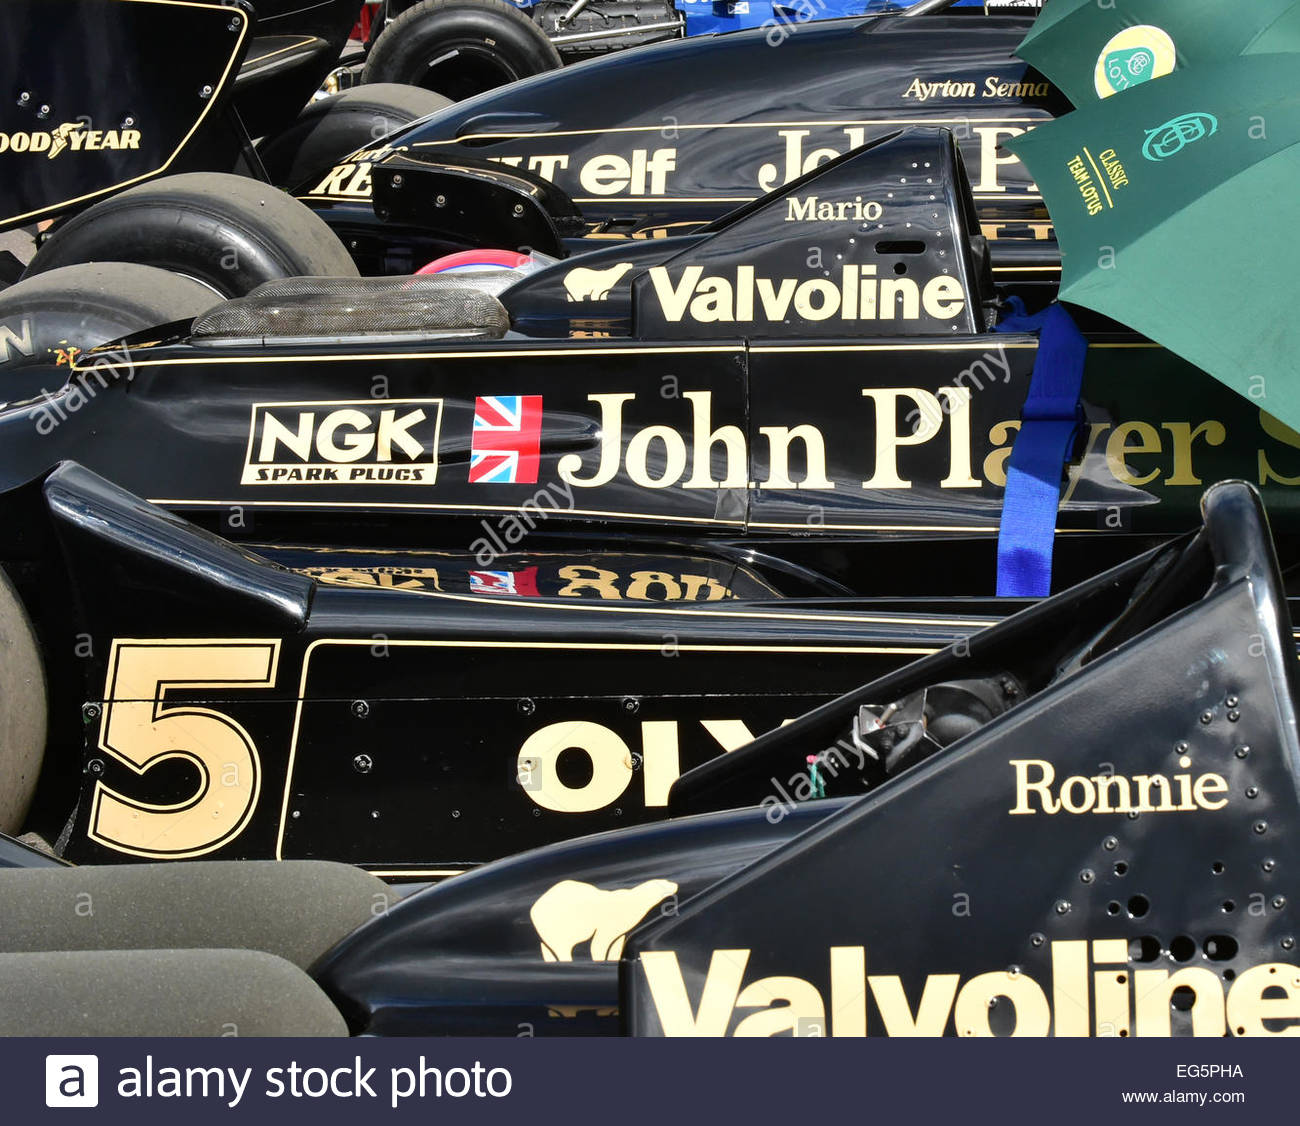 a-collection-of-jps-lotus-f1-cars-at-goodwood-festival-of-speed-2014-EG5PHA.jpg